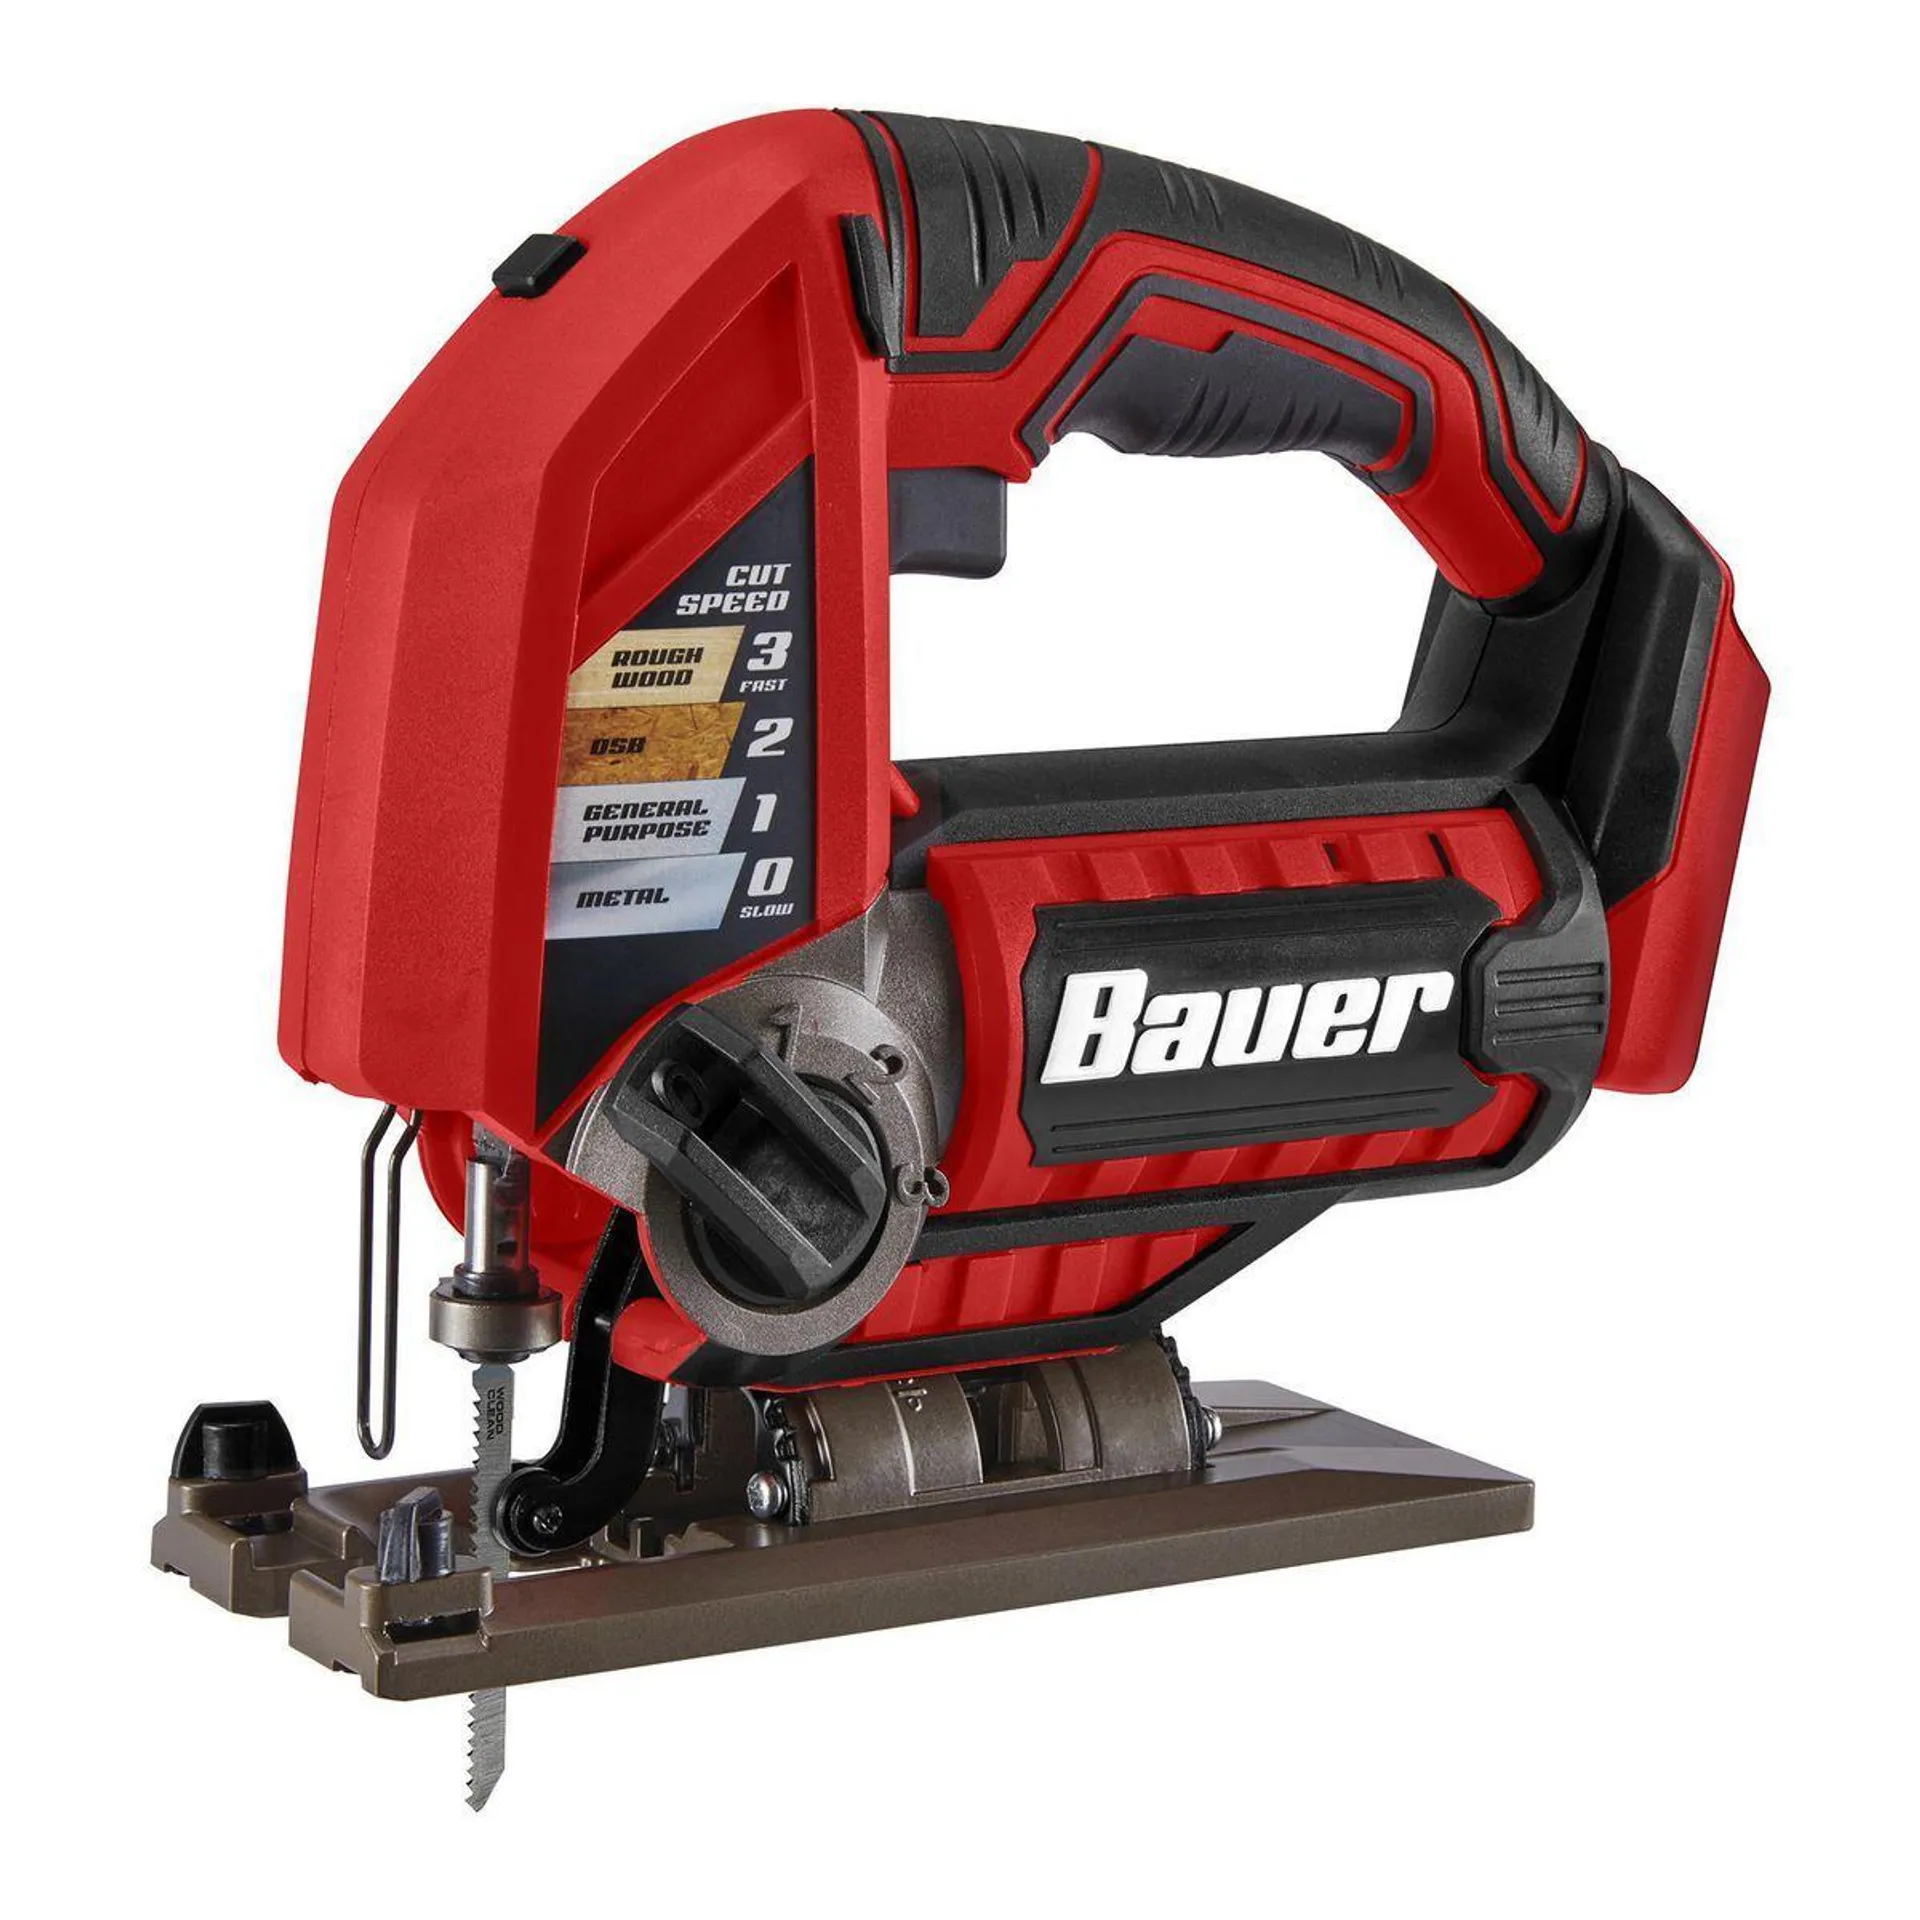 BAUER 20V Cordless Variable Speed Jig Saw - Tool Only